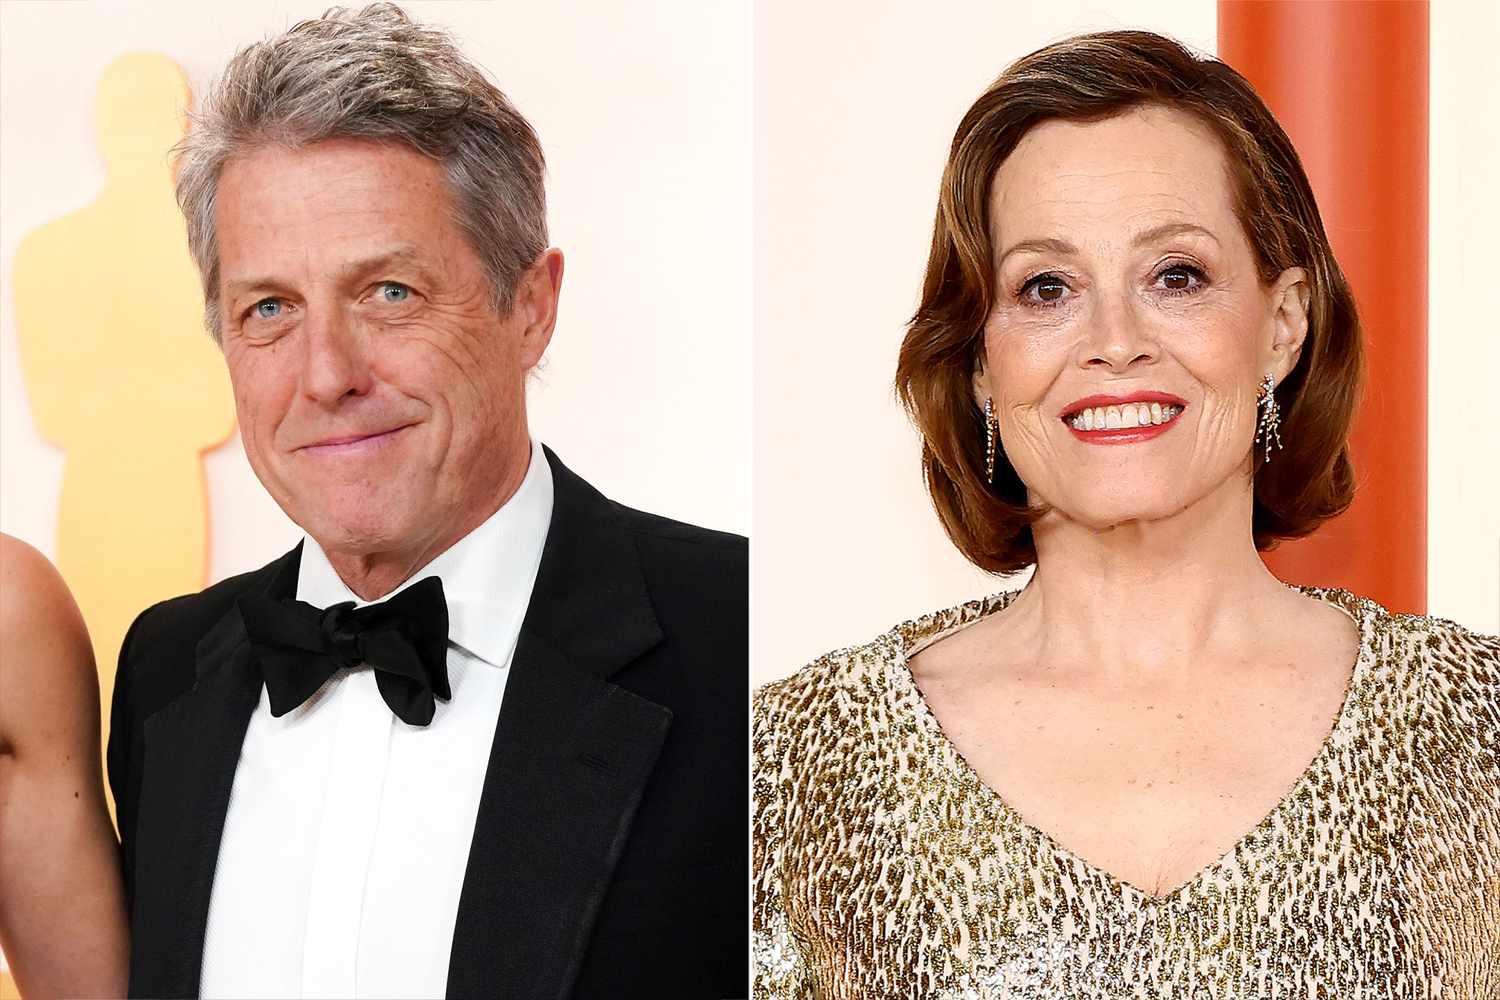 Hugh Grant arrive at the Oscars, at the Dolby Theatre in Los Angeles 95th Academy Awards - Arrivals, Los Angeles, United States - 12 Mar 2023, Sigourney Weaver attends the 95th Annual Academy Awards on March 12, 2023 in Hollywood, California.